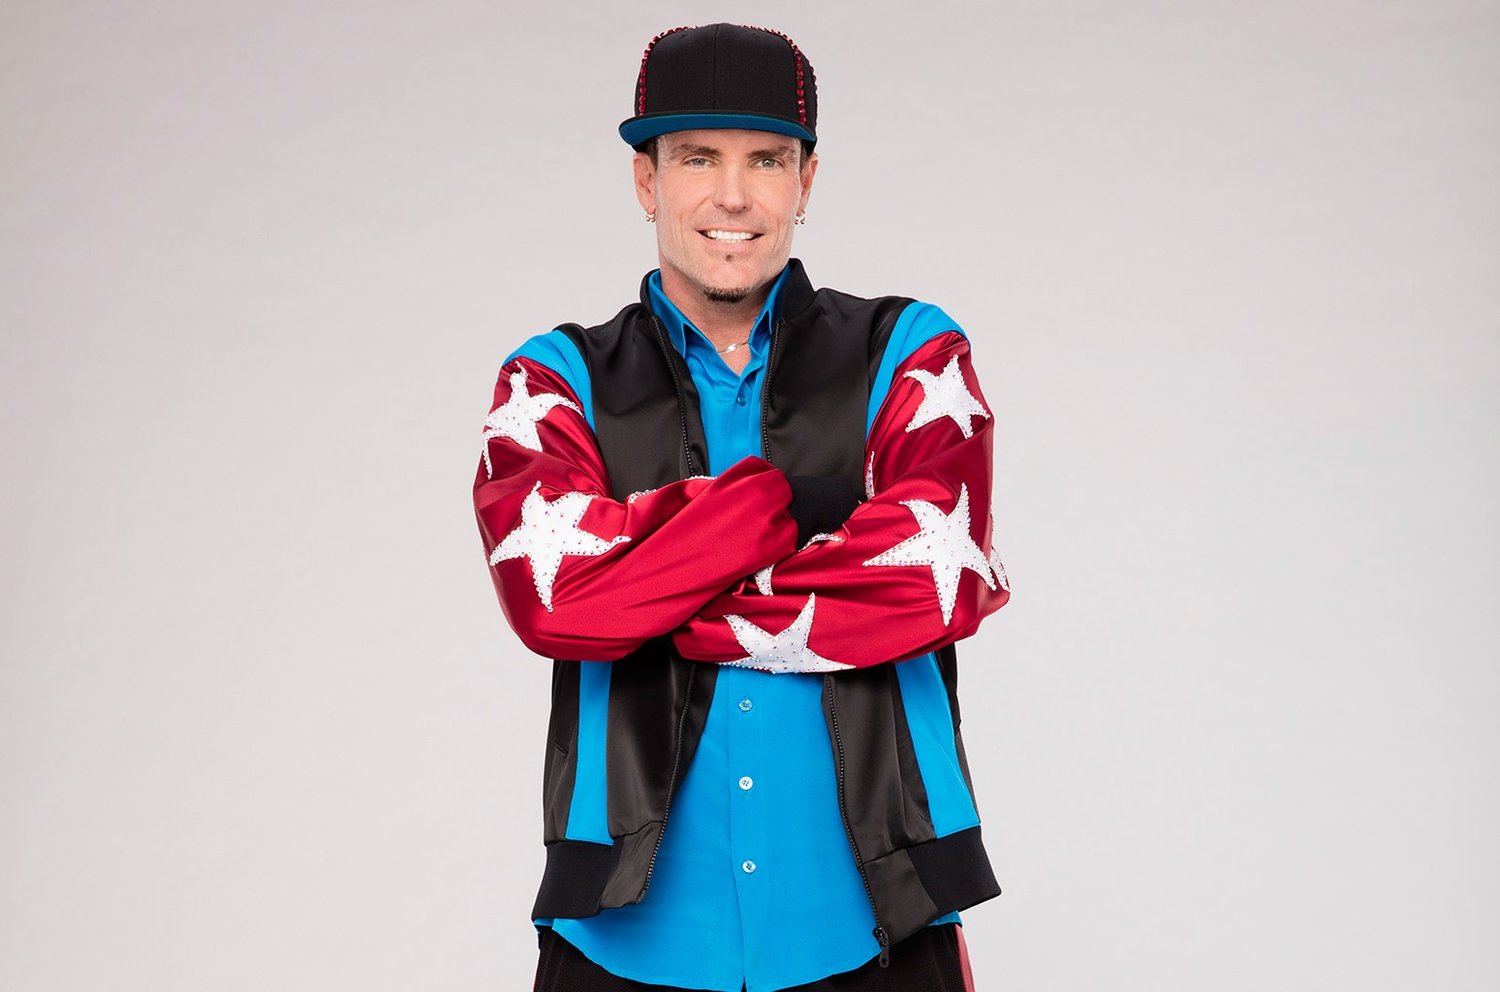 Vanilla Ice will headline the third annual As If! The 90’s Fest.